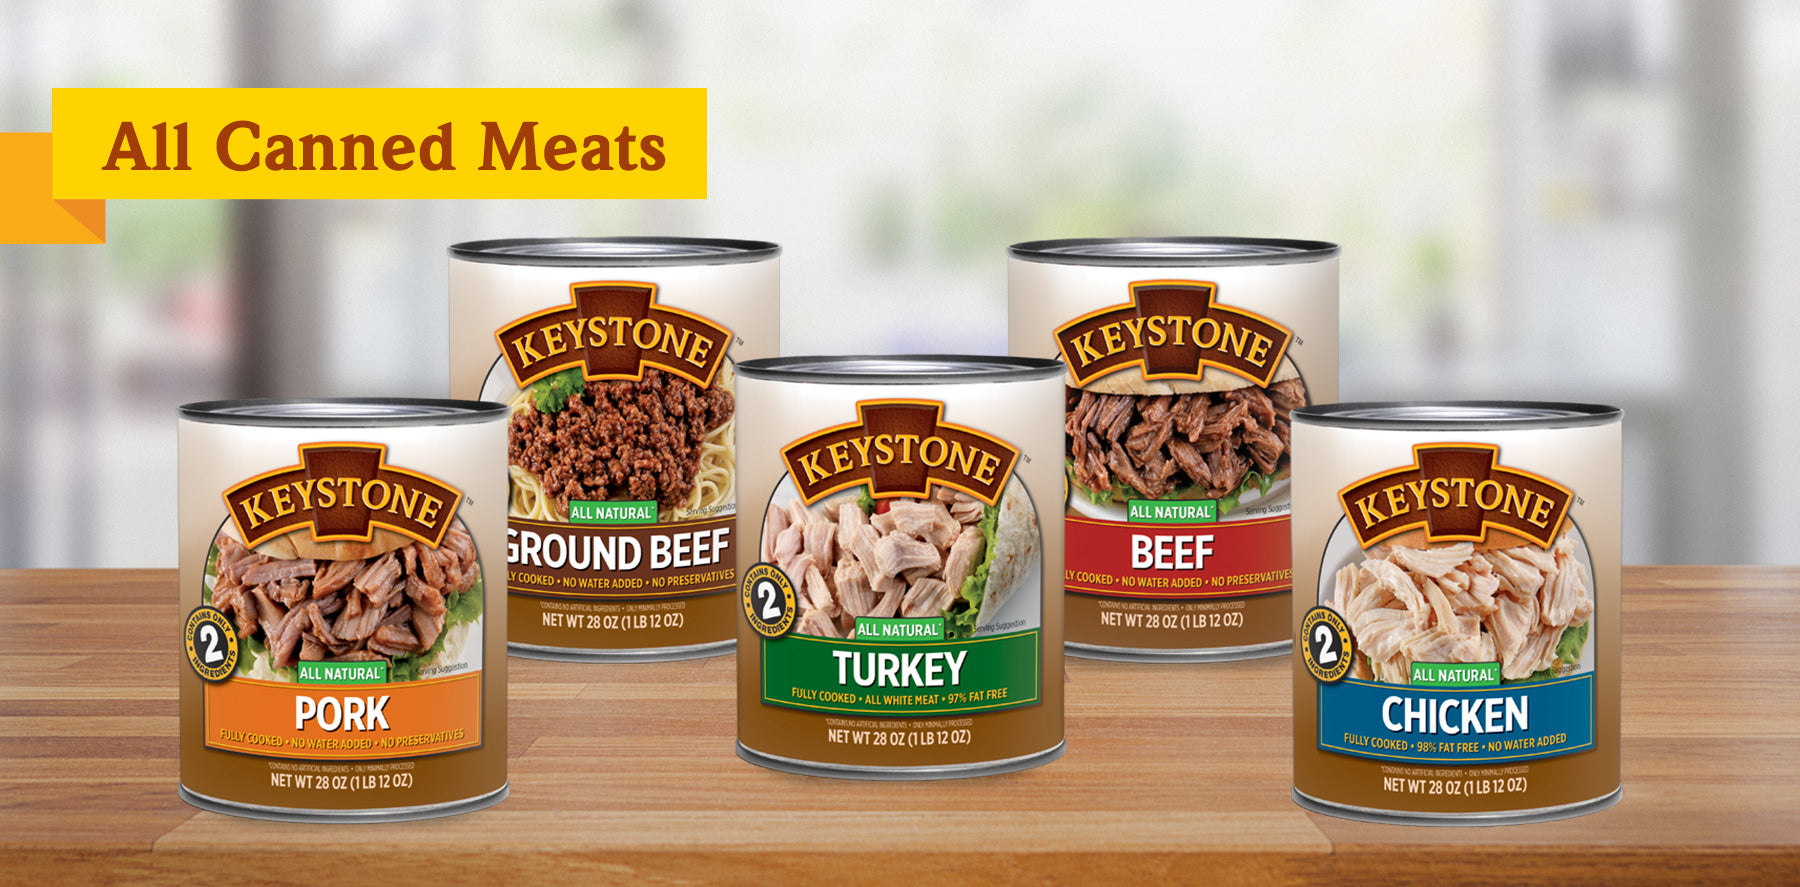 all-canned-meats-header-2019 image